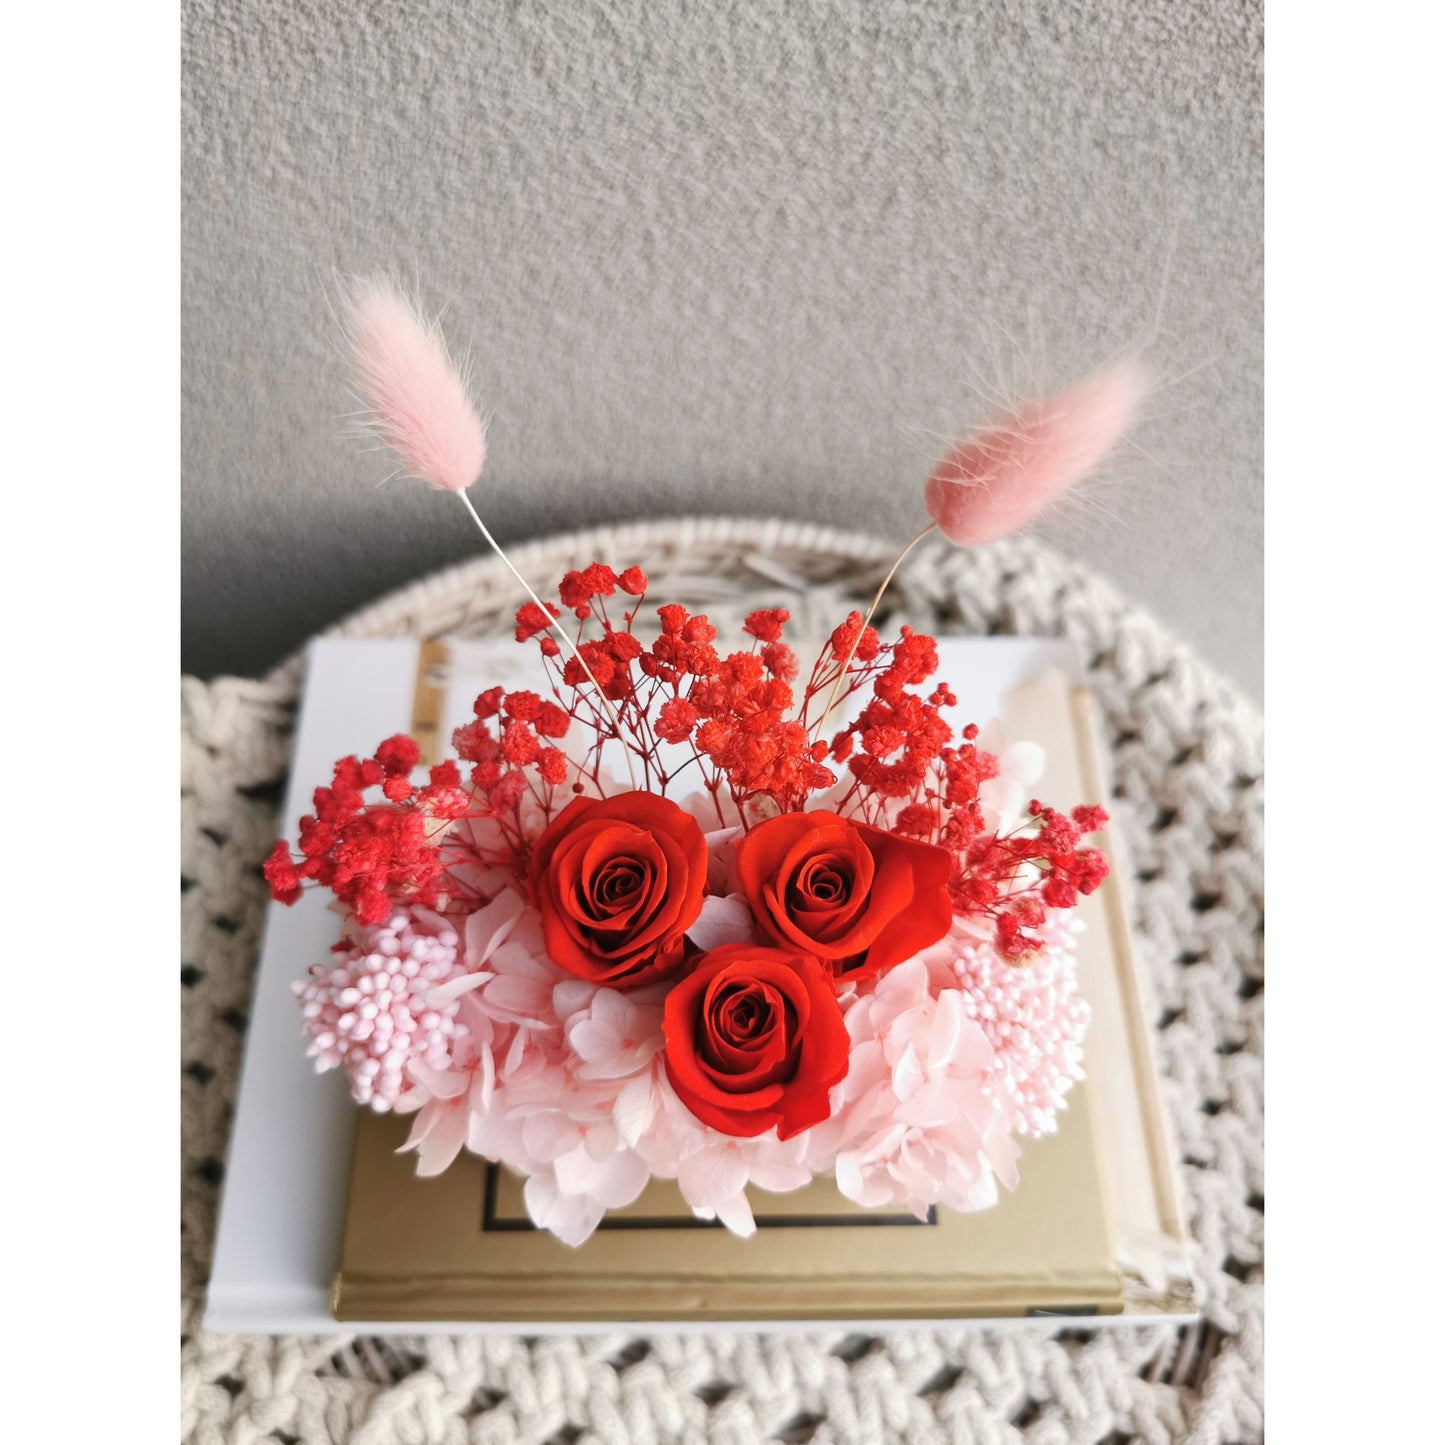 Valentines Day dried & preserved flower arrangement with red & pink flowers in pink arch vase. Photo shows arrangement sitting on books against a blank wall from a birds eye view of the flowers